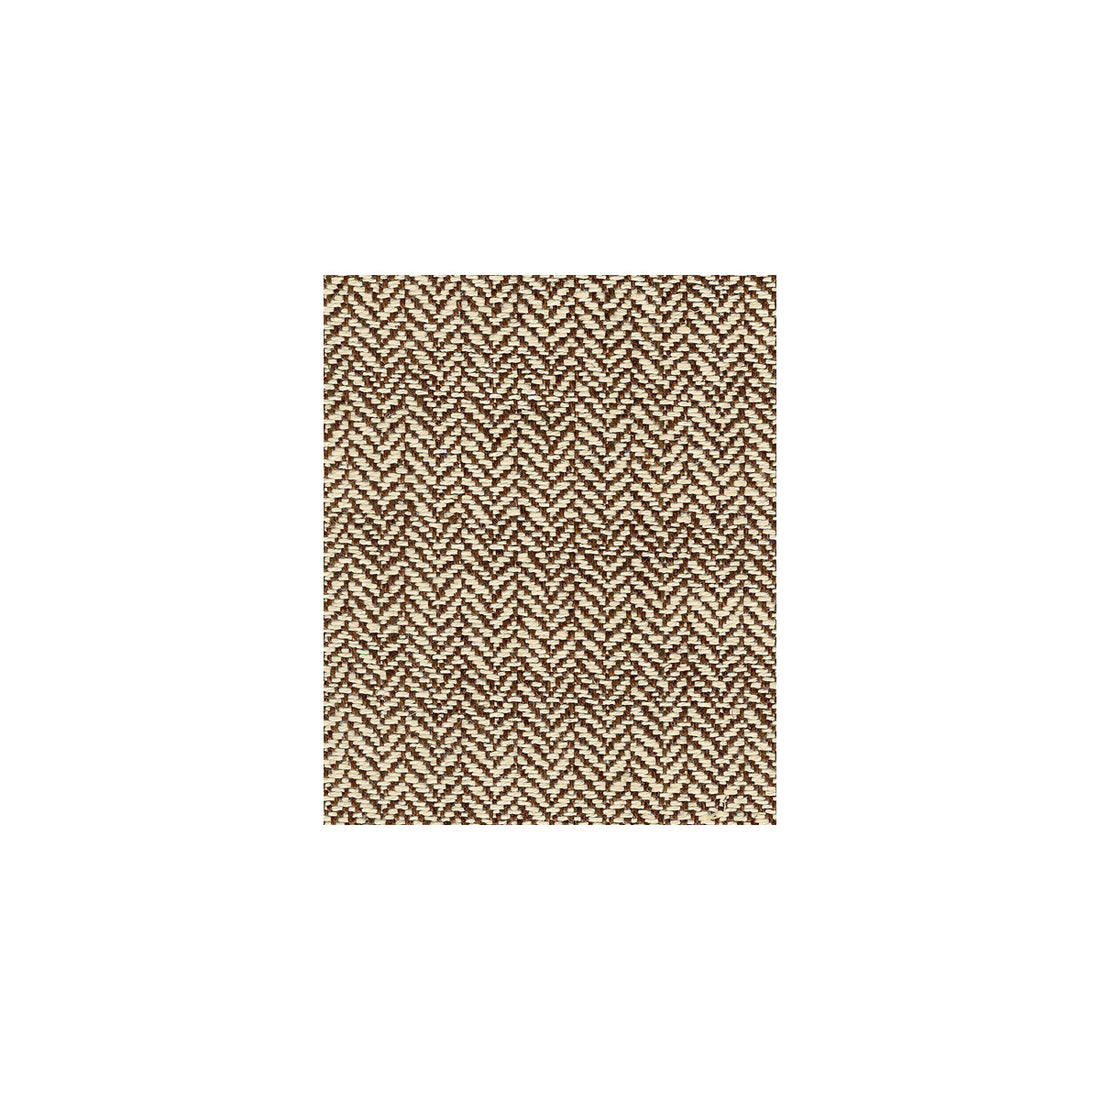 Linen Bevel fabric in fur color - pattern SC10011.6.0 - by Seacloth